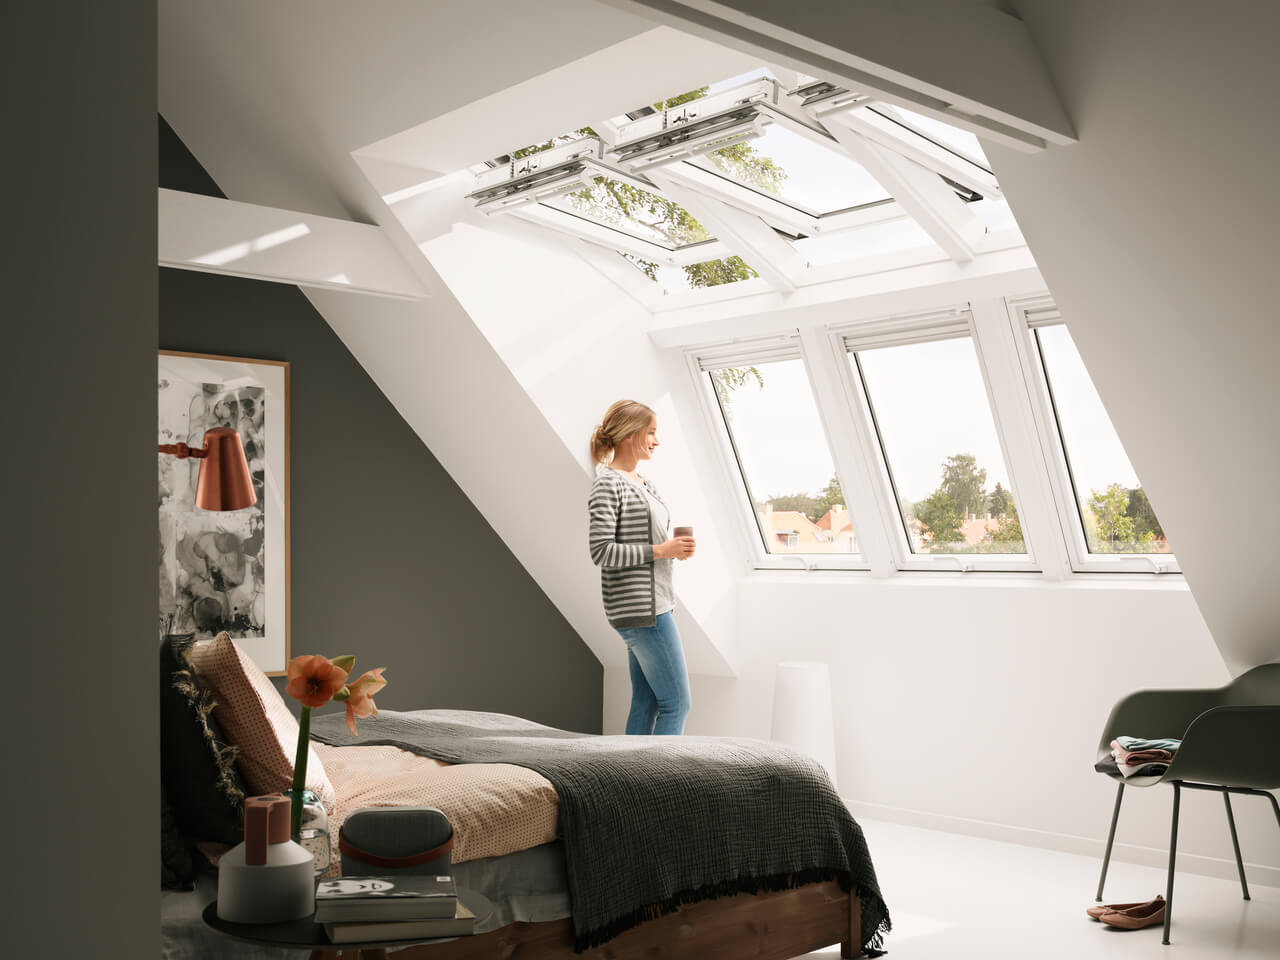 Woman standing in the bedroom and looking away from the dormer roof windows.